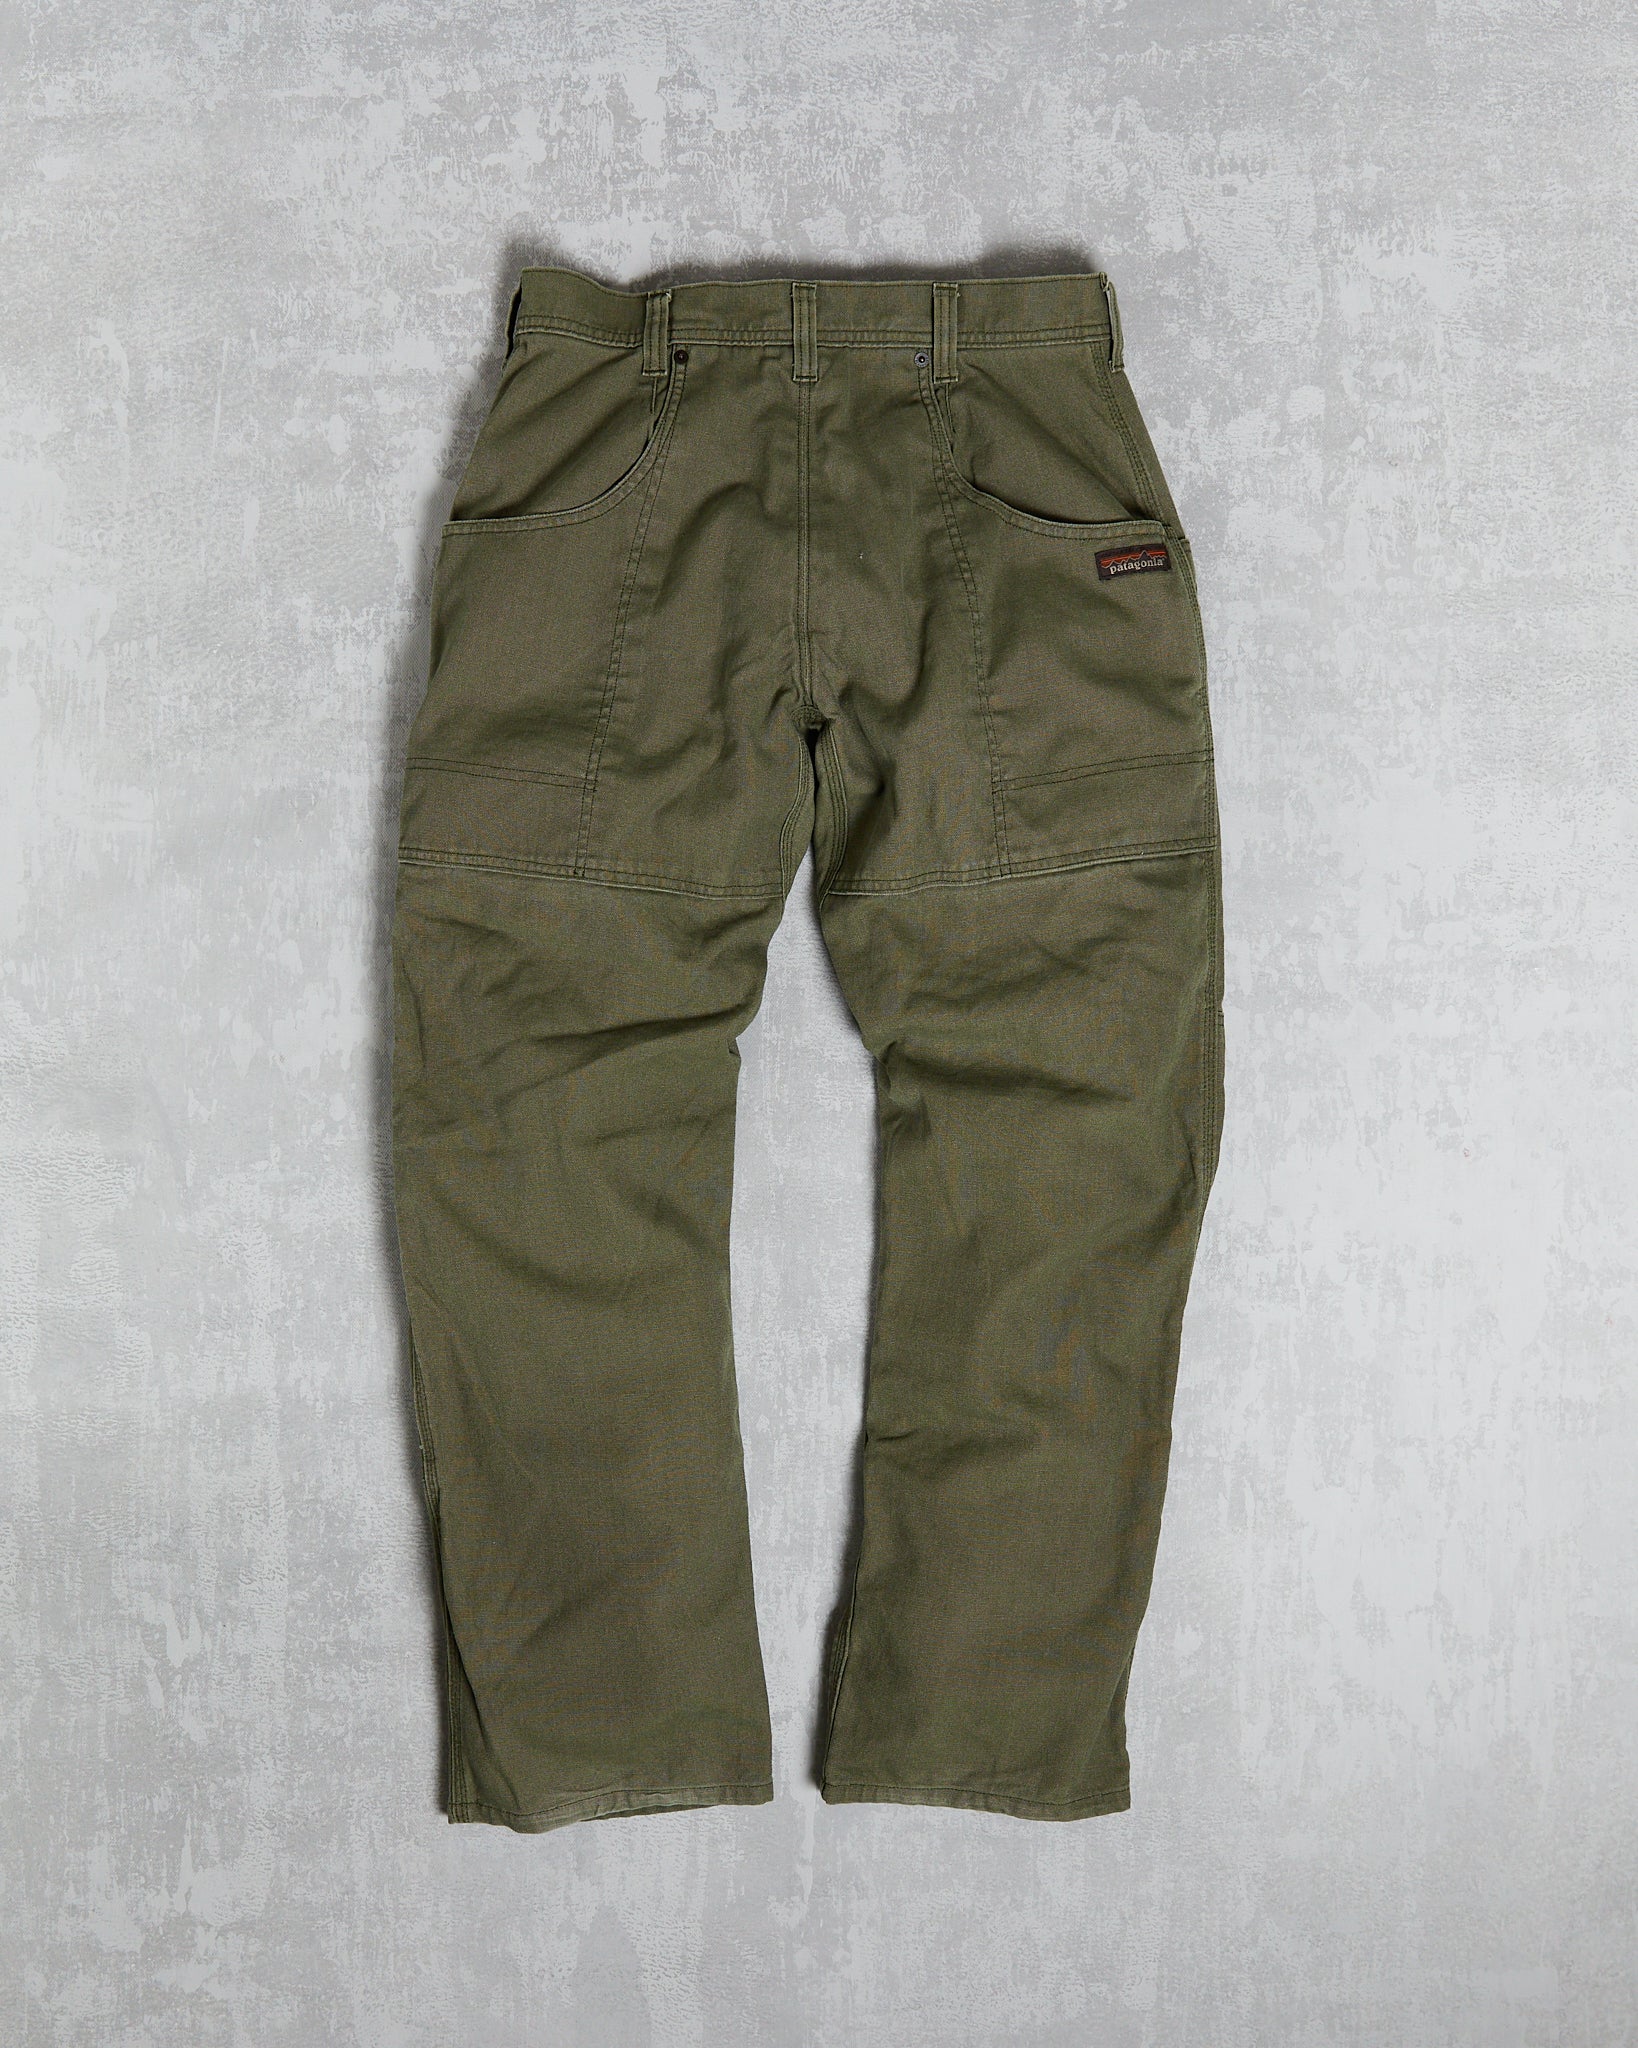 Patagonia stand up canvas pants green army olive 32